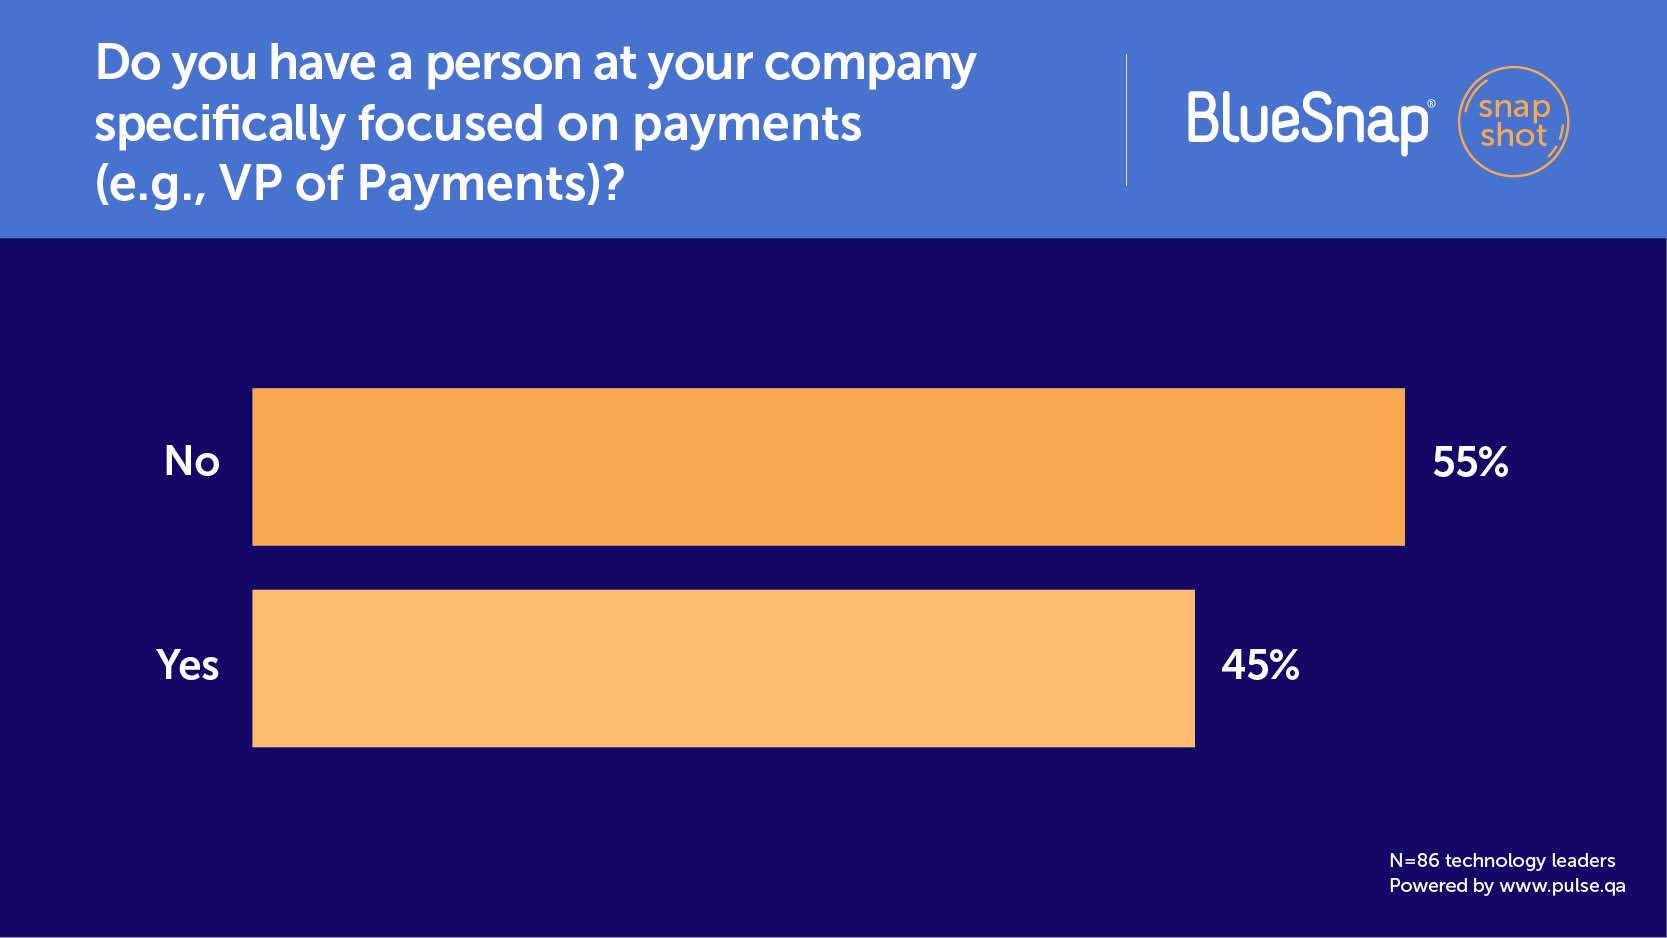 Weekly Snapshot: More Than Half of Companies Do Not Have Someone Focused Specifically on Payments